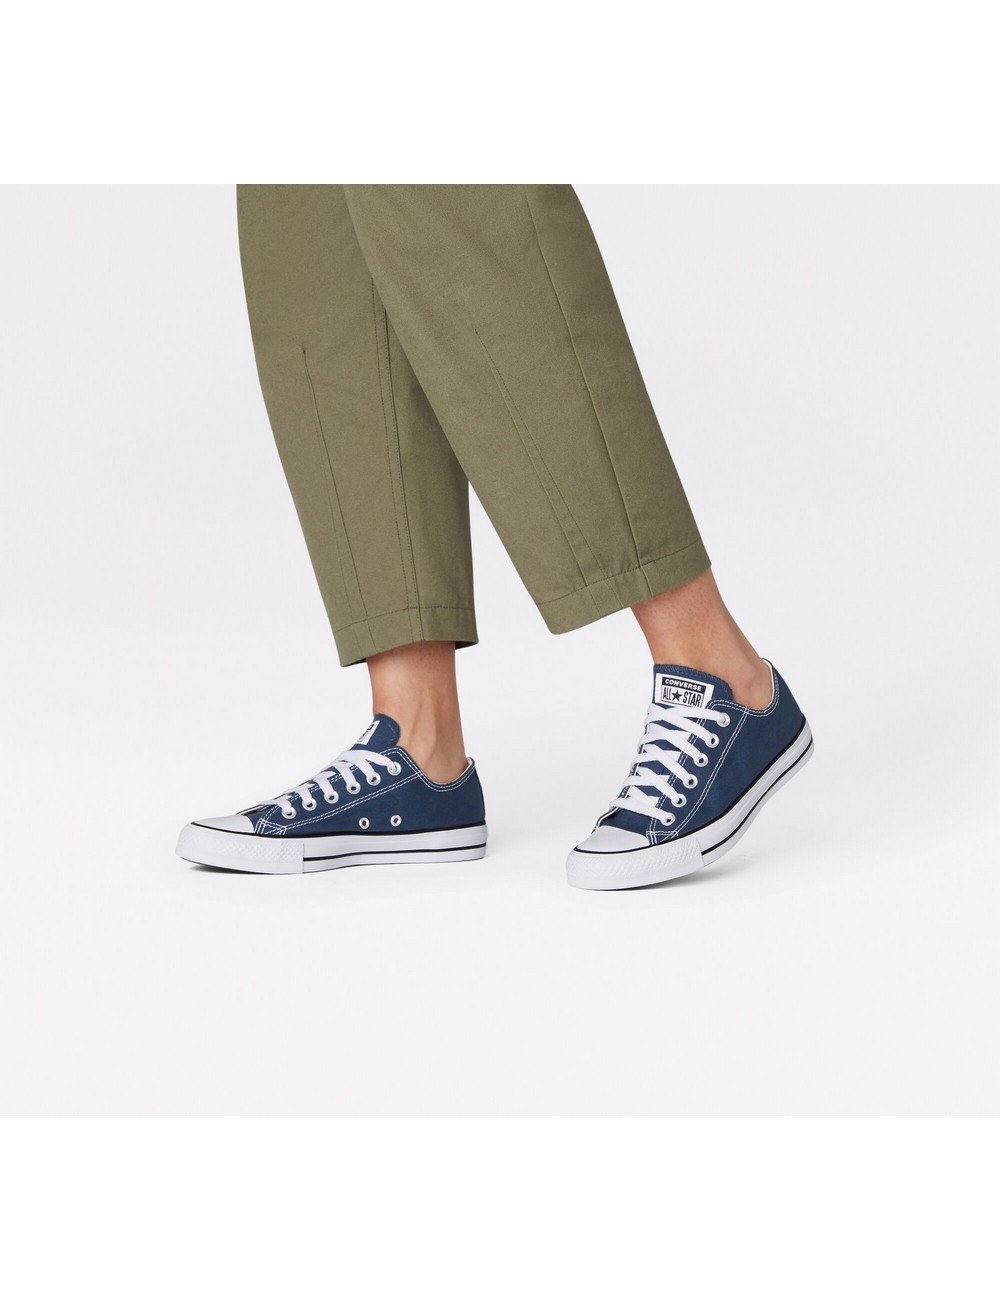 SNEAKERS CONVERSE CHUCK TAYLOR ALL STAR LOW TOP